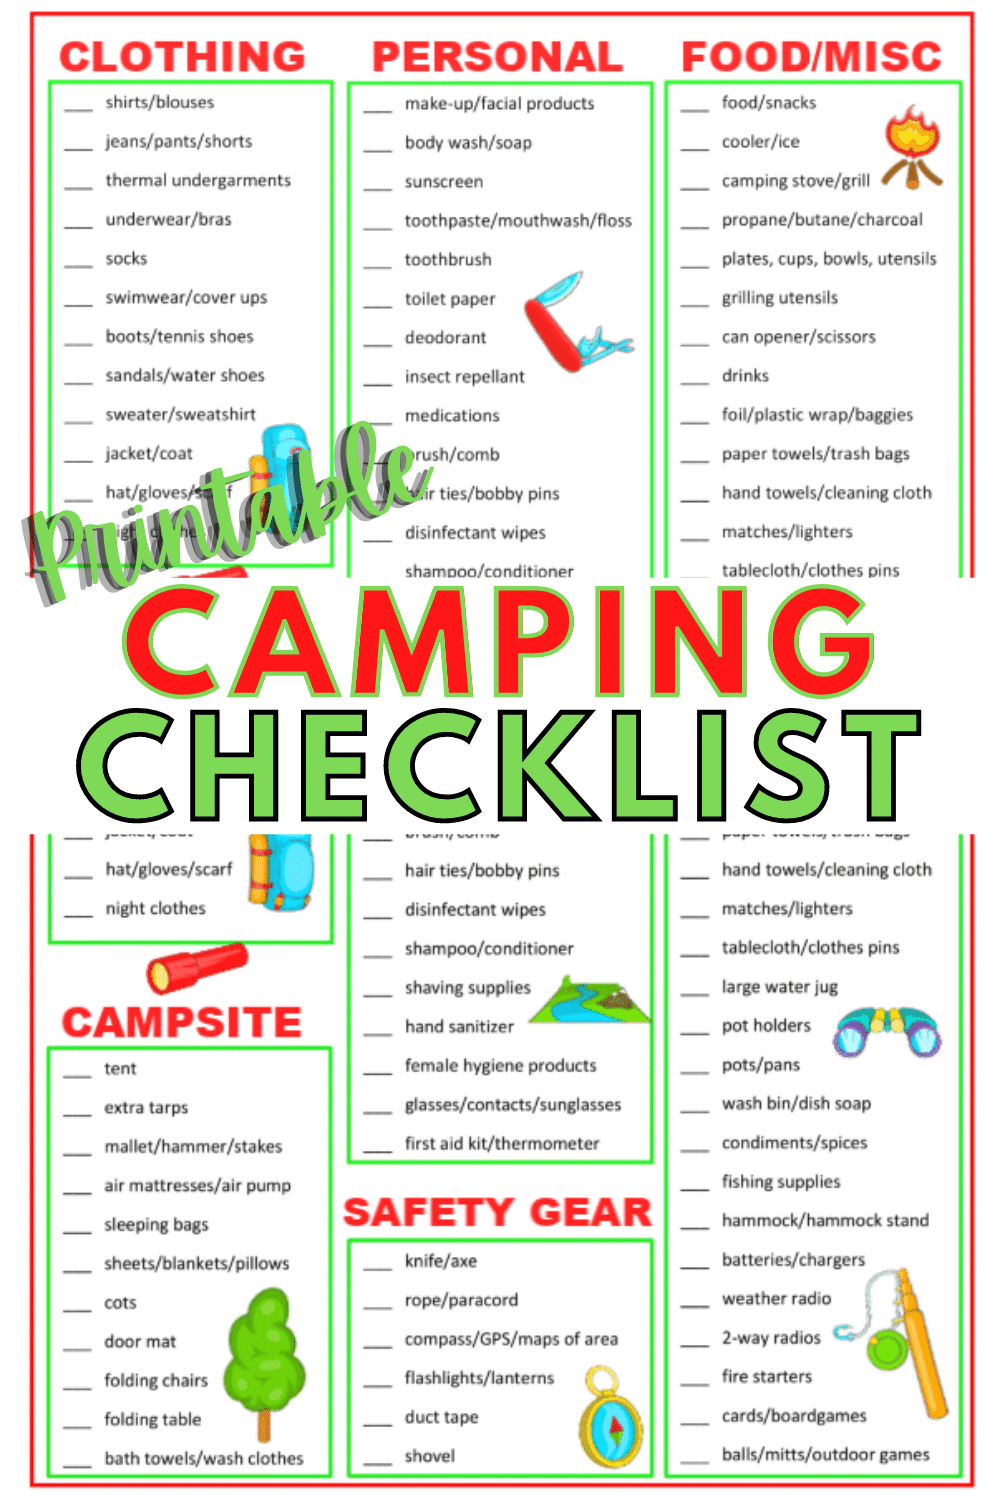 A camping checklist printable will help you make sure you get to the camp site with all the supplies you need for a successful camping trip! #camping #printables #checklist via @wondermomwannab